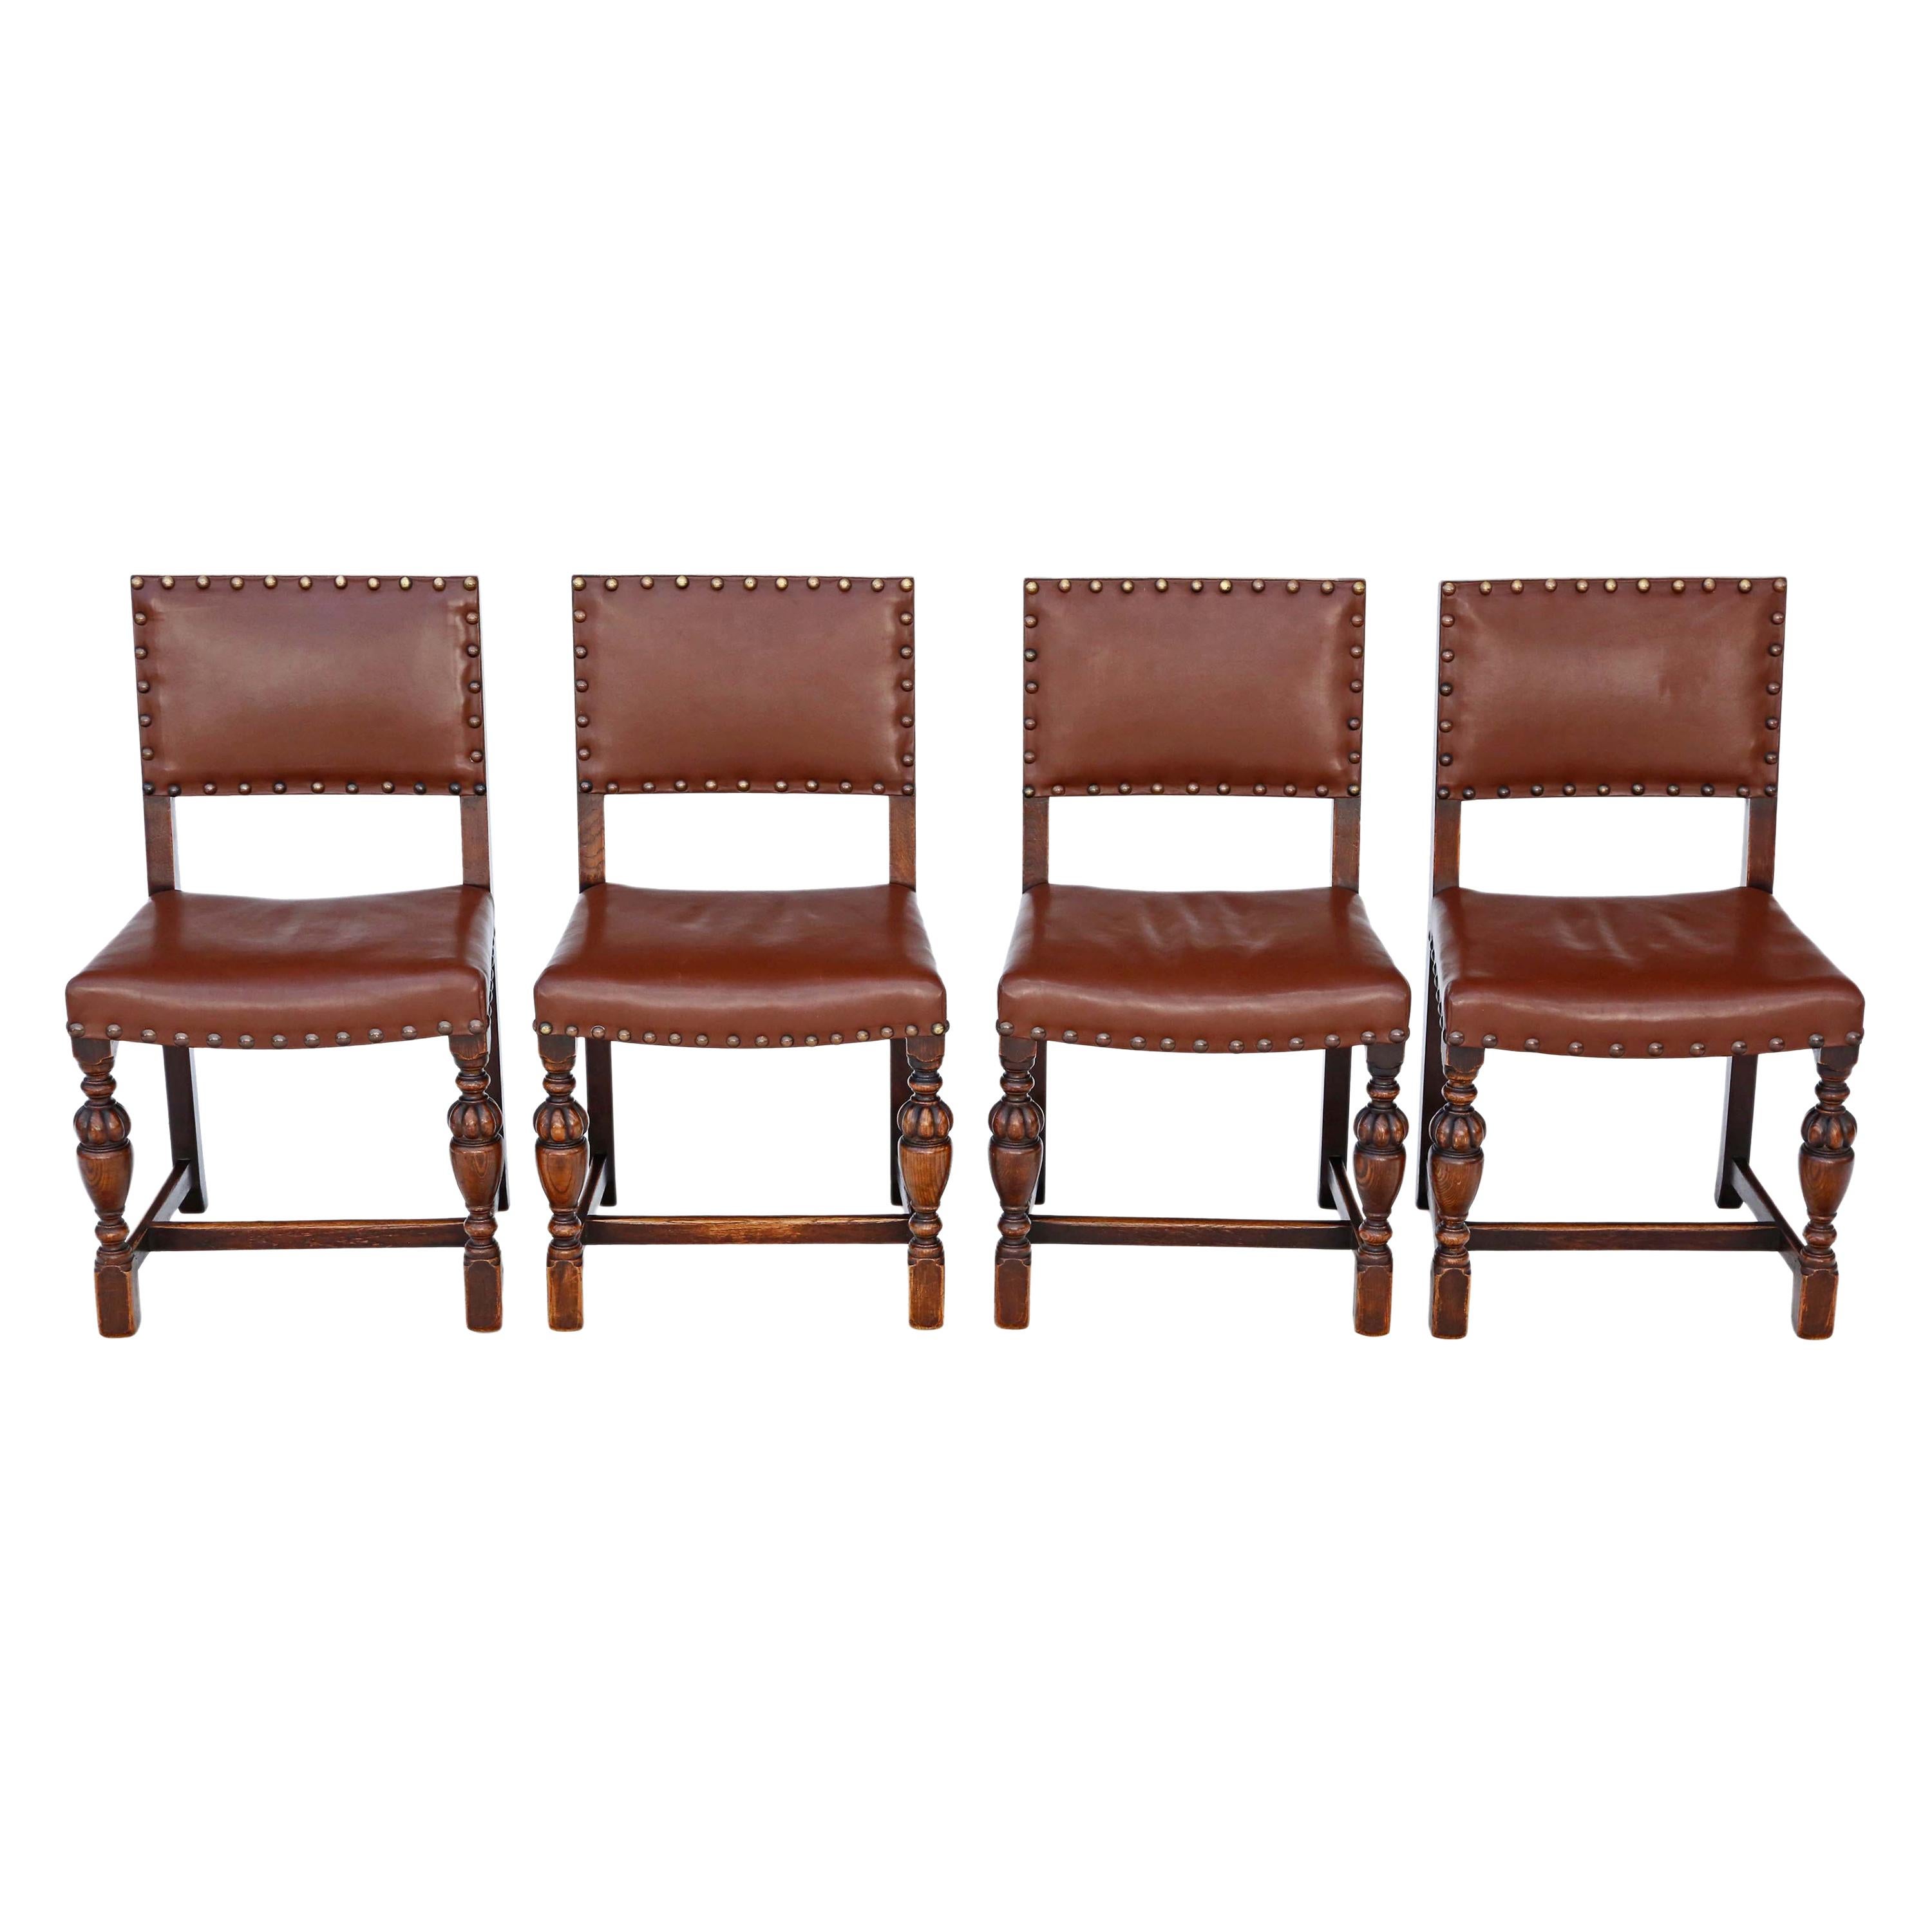 Antique Set of 4 circa 1920 Oak and Leather Dining Chairs Jacobean Revival